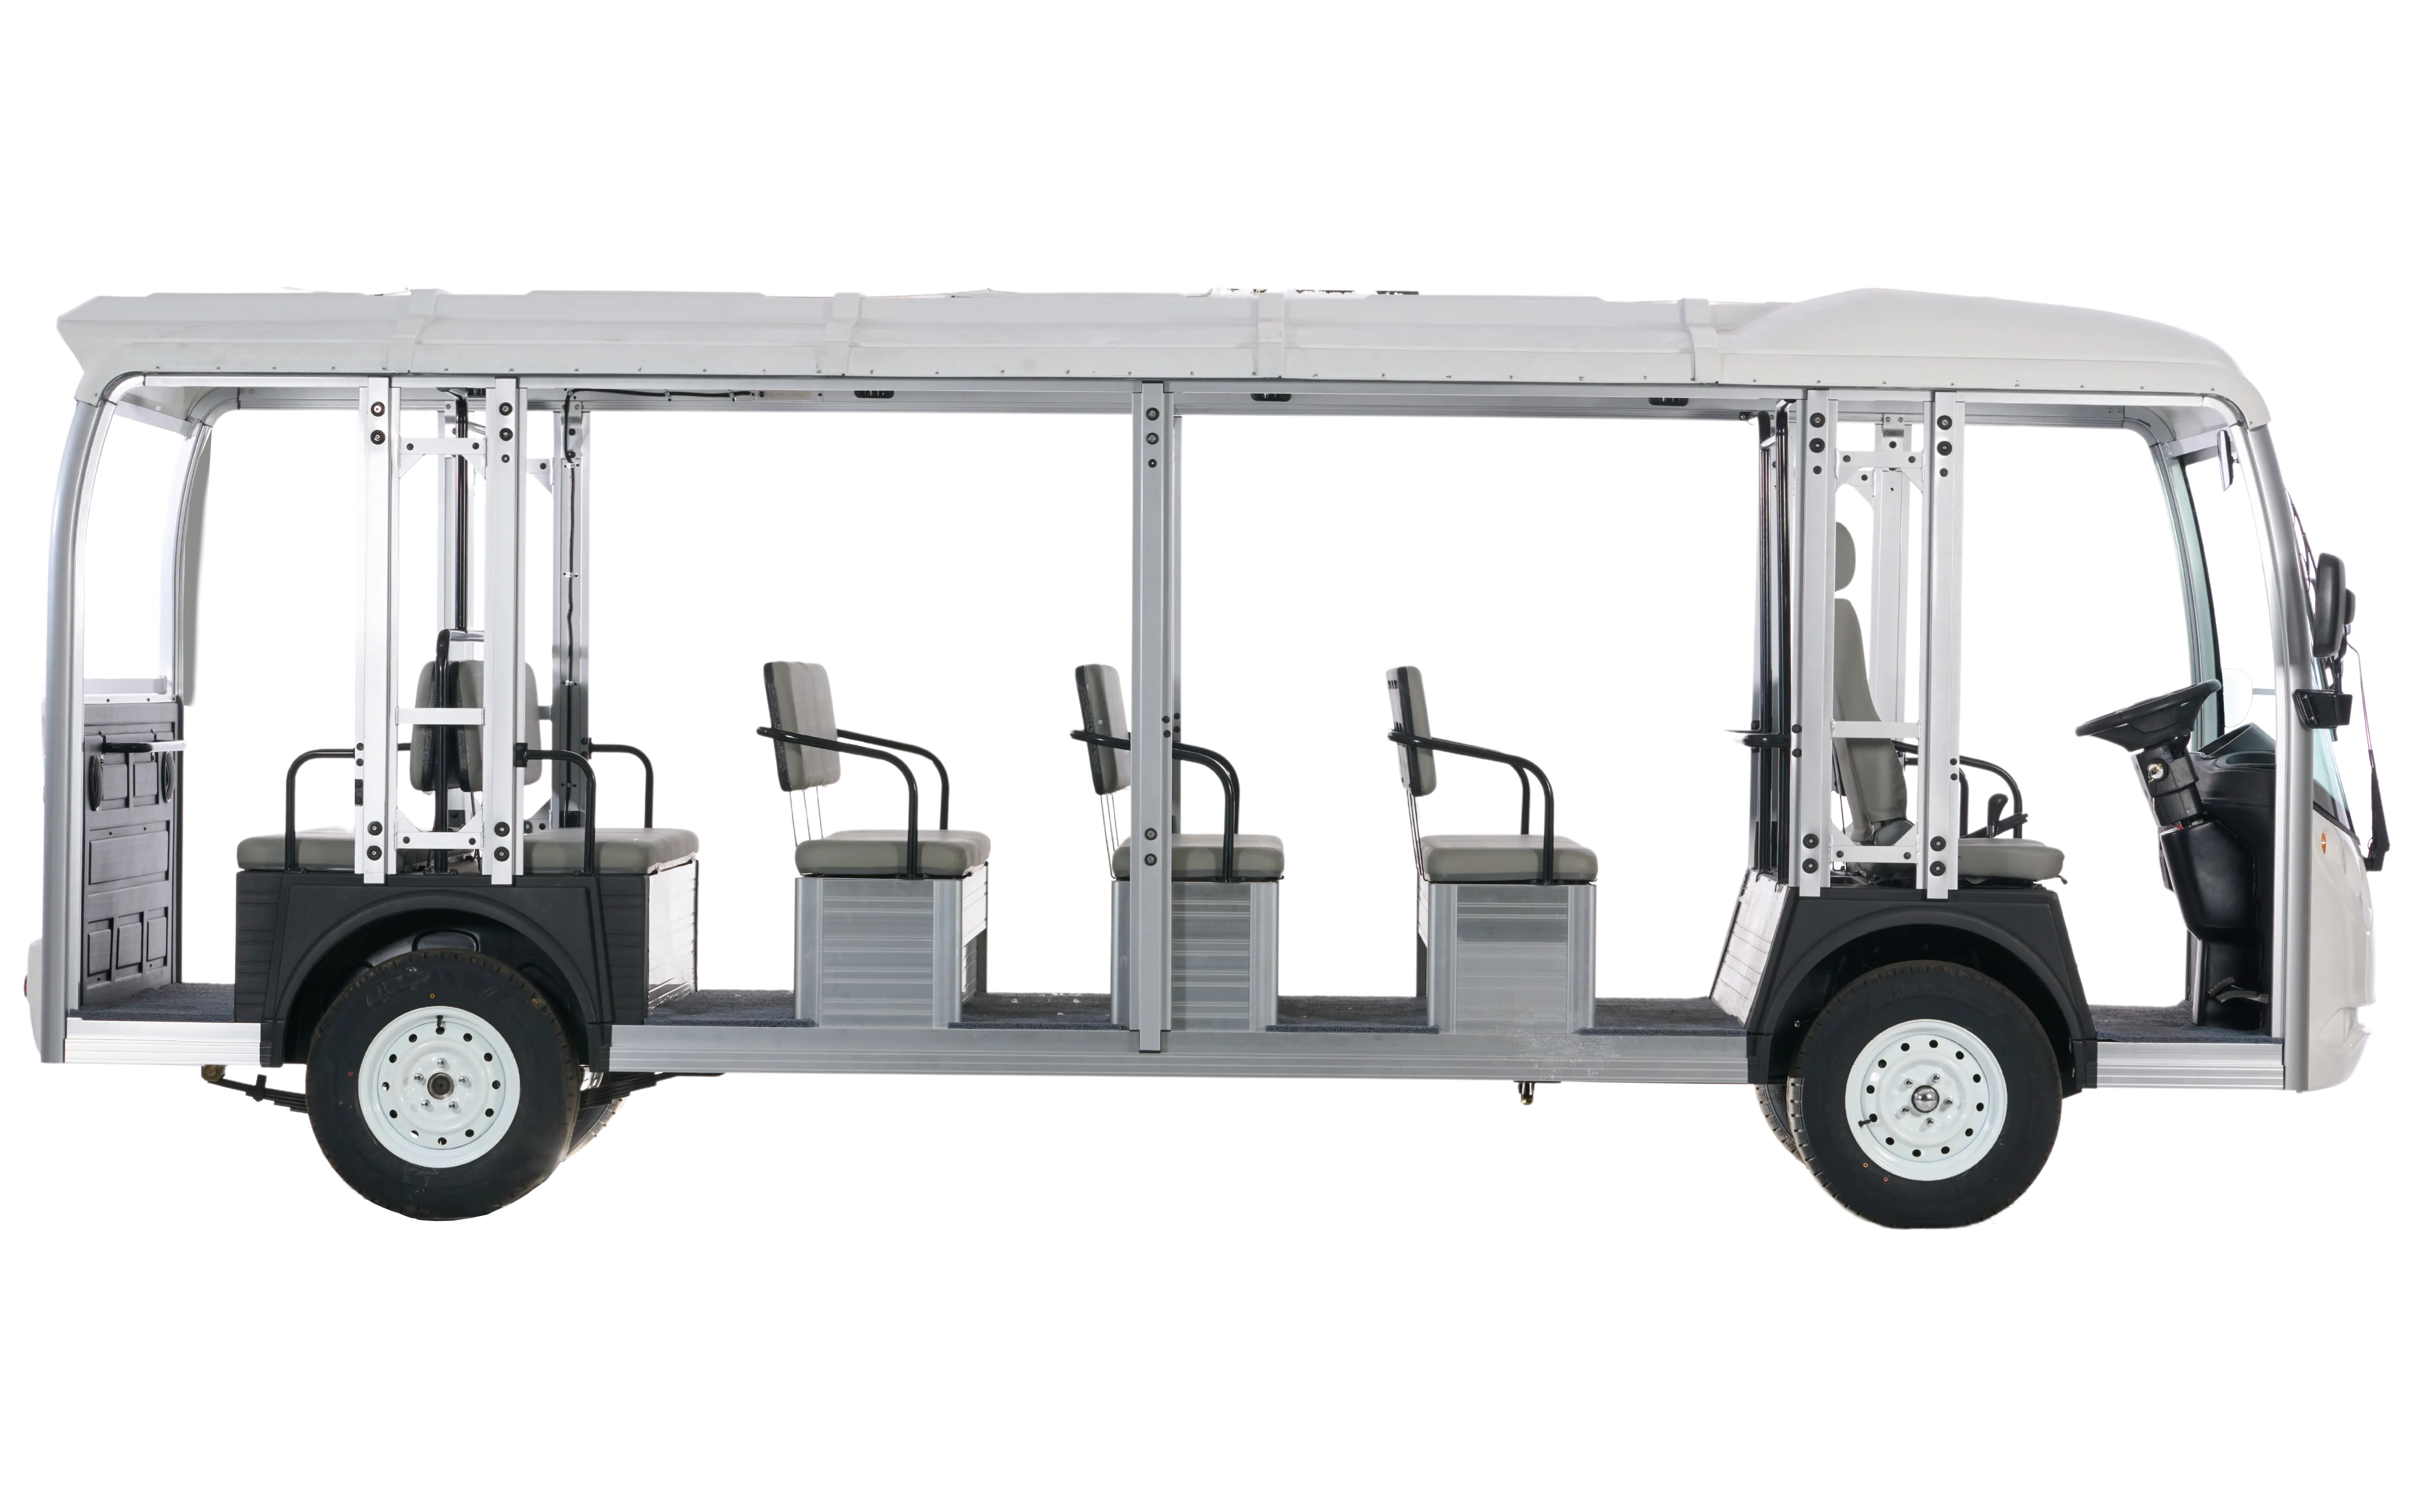  23 Seater Battery Power Mini Bus - Tri Electric
                                        